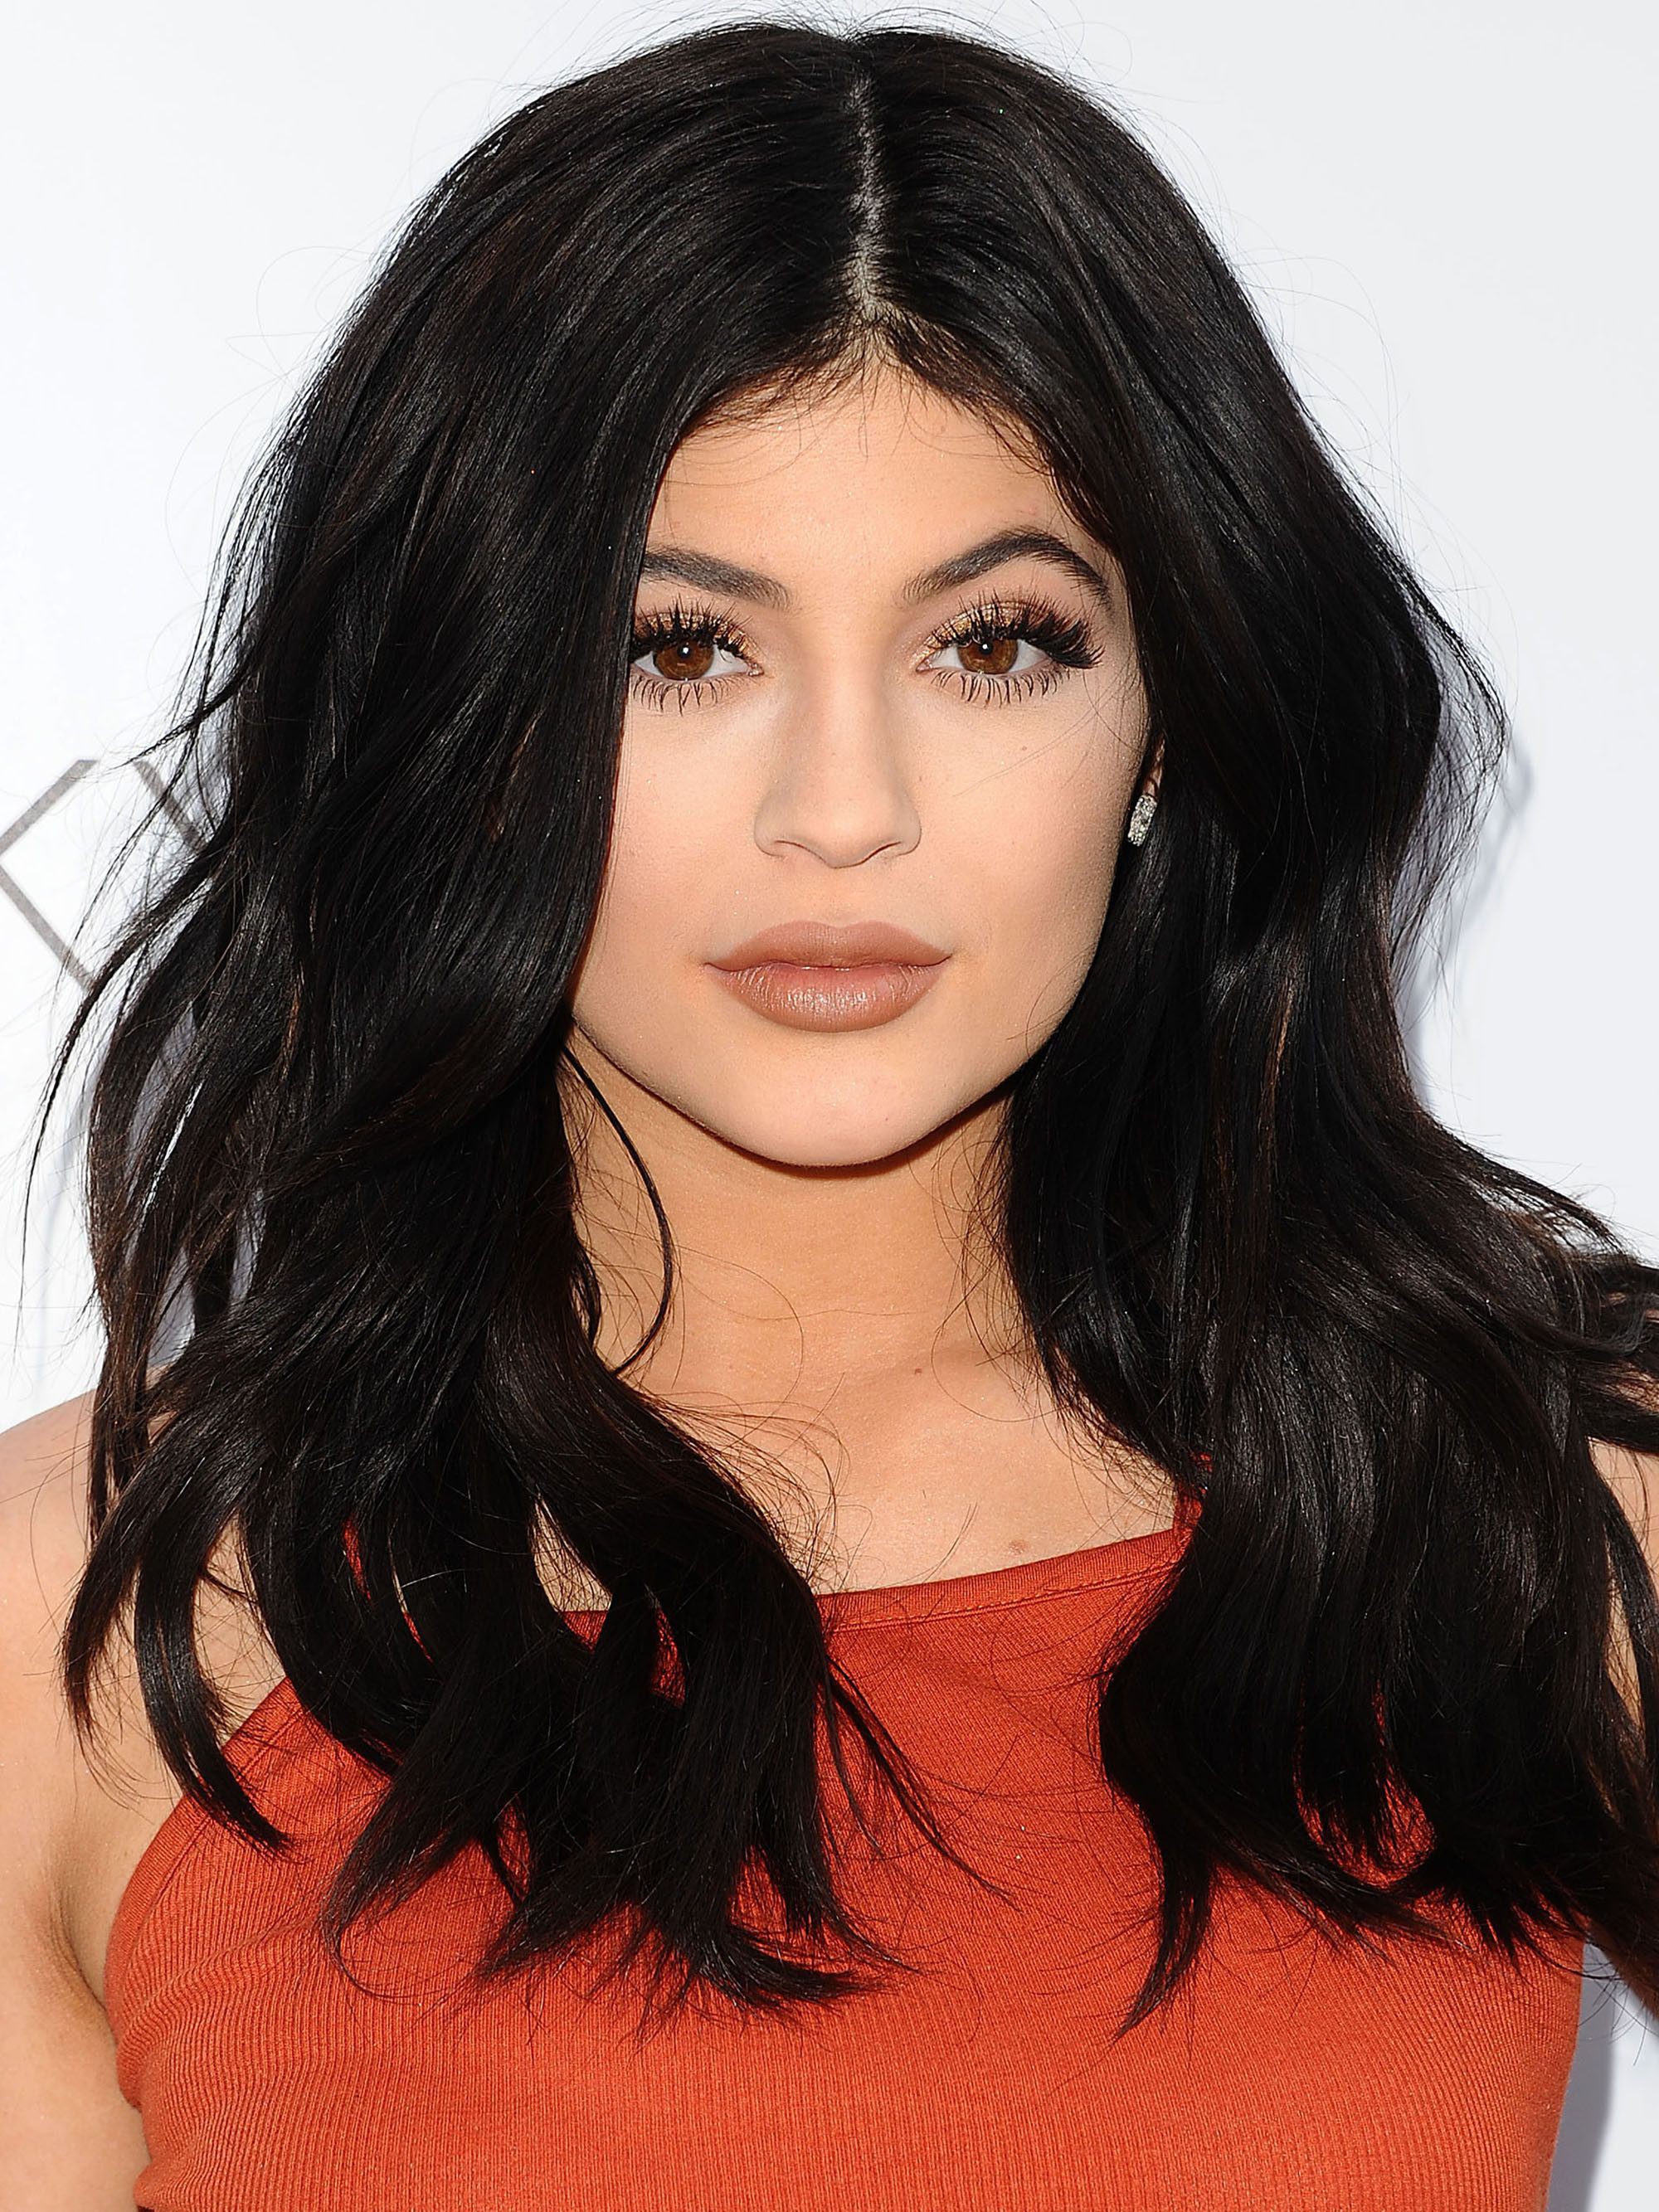 Image result for kylie in black hair